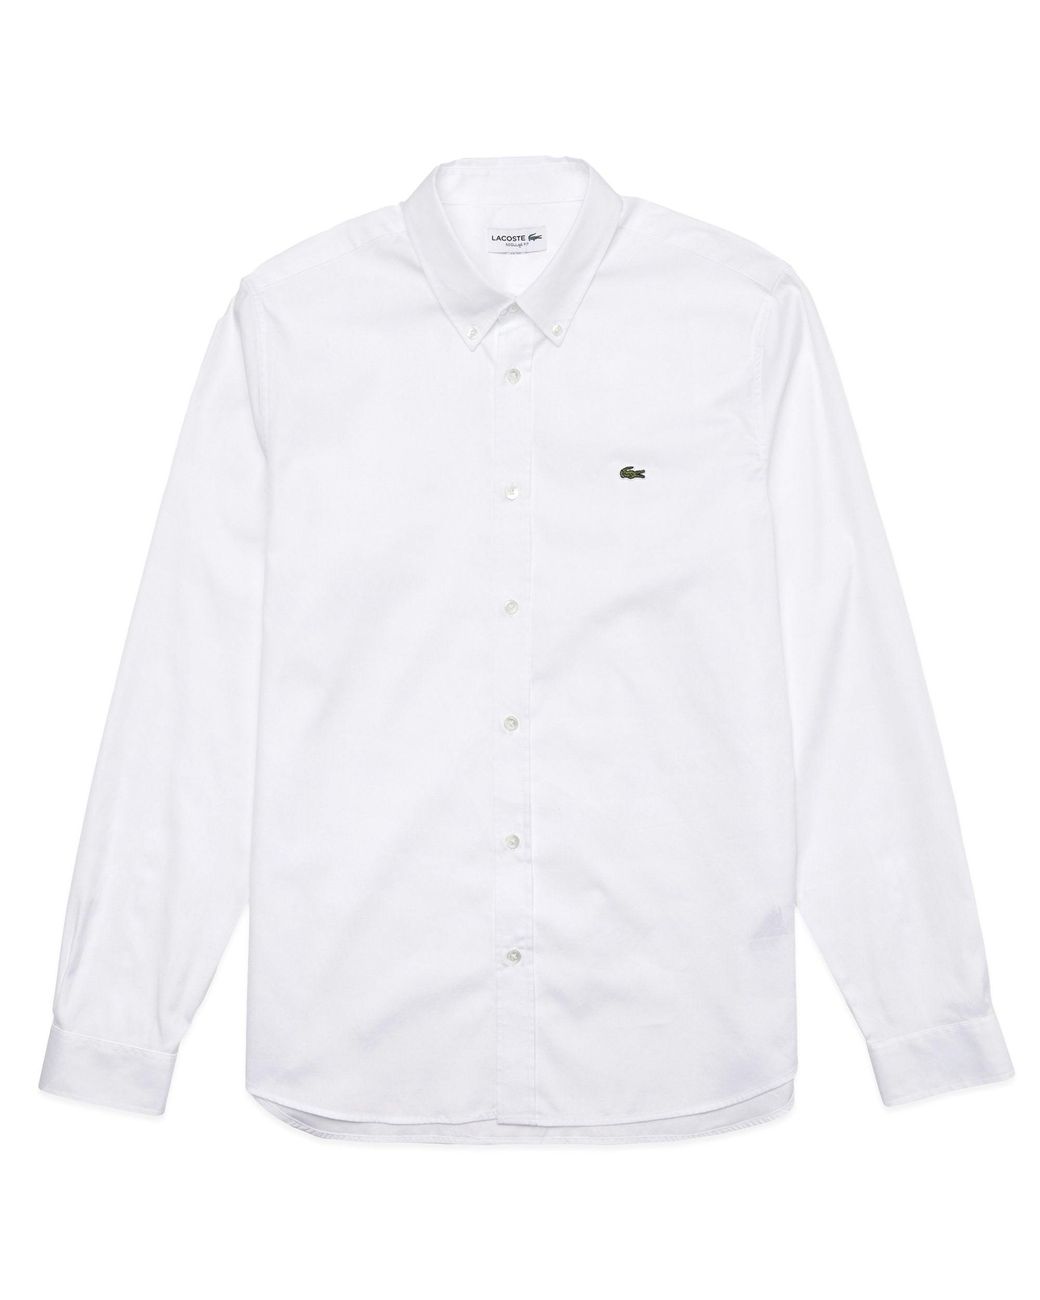 Lacoste Cotton Long Sleeve Shirt Ch 2933 White for Men - Save 23 